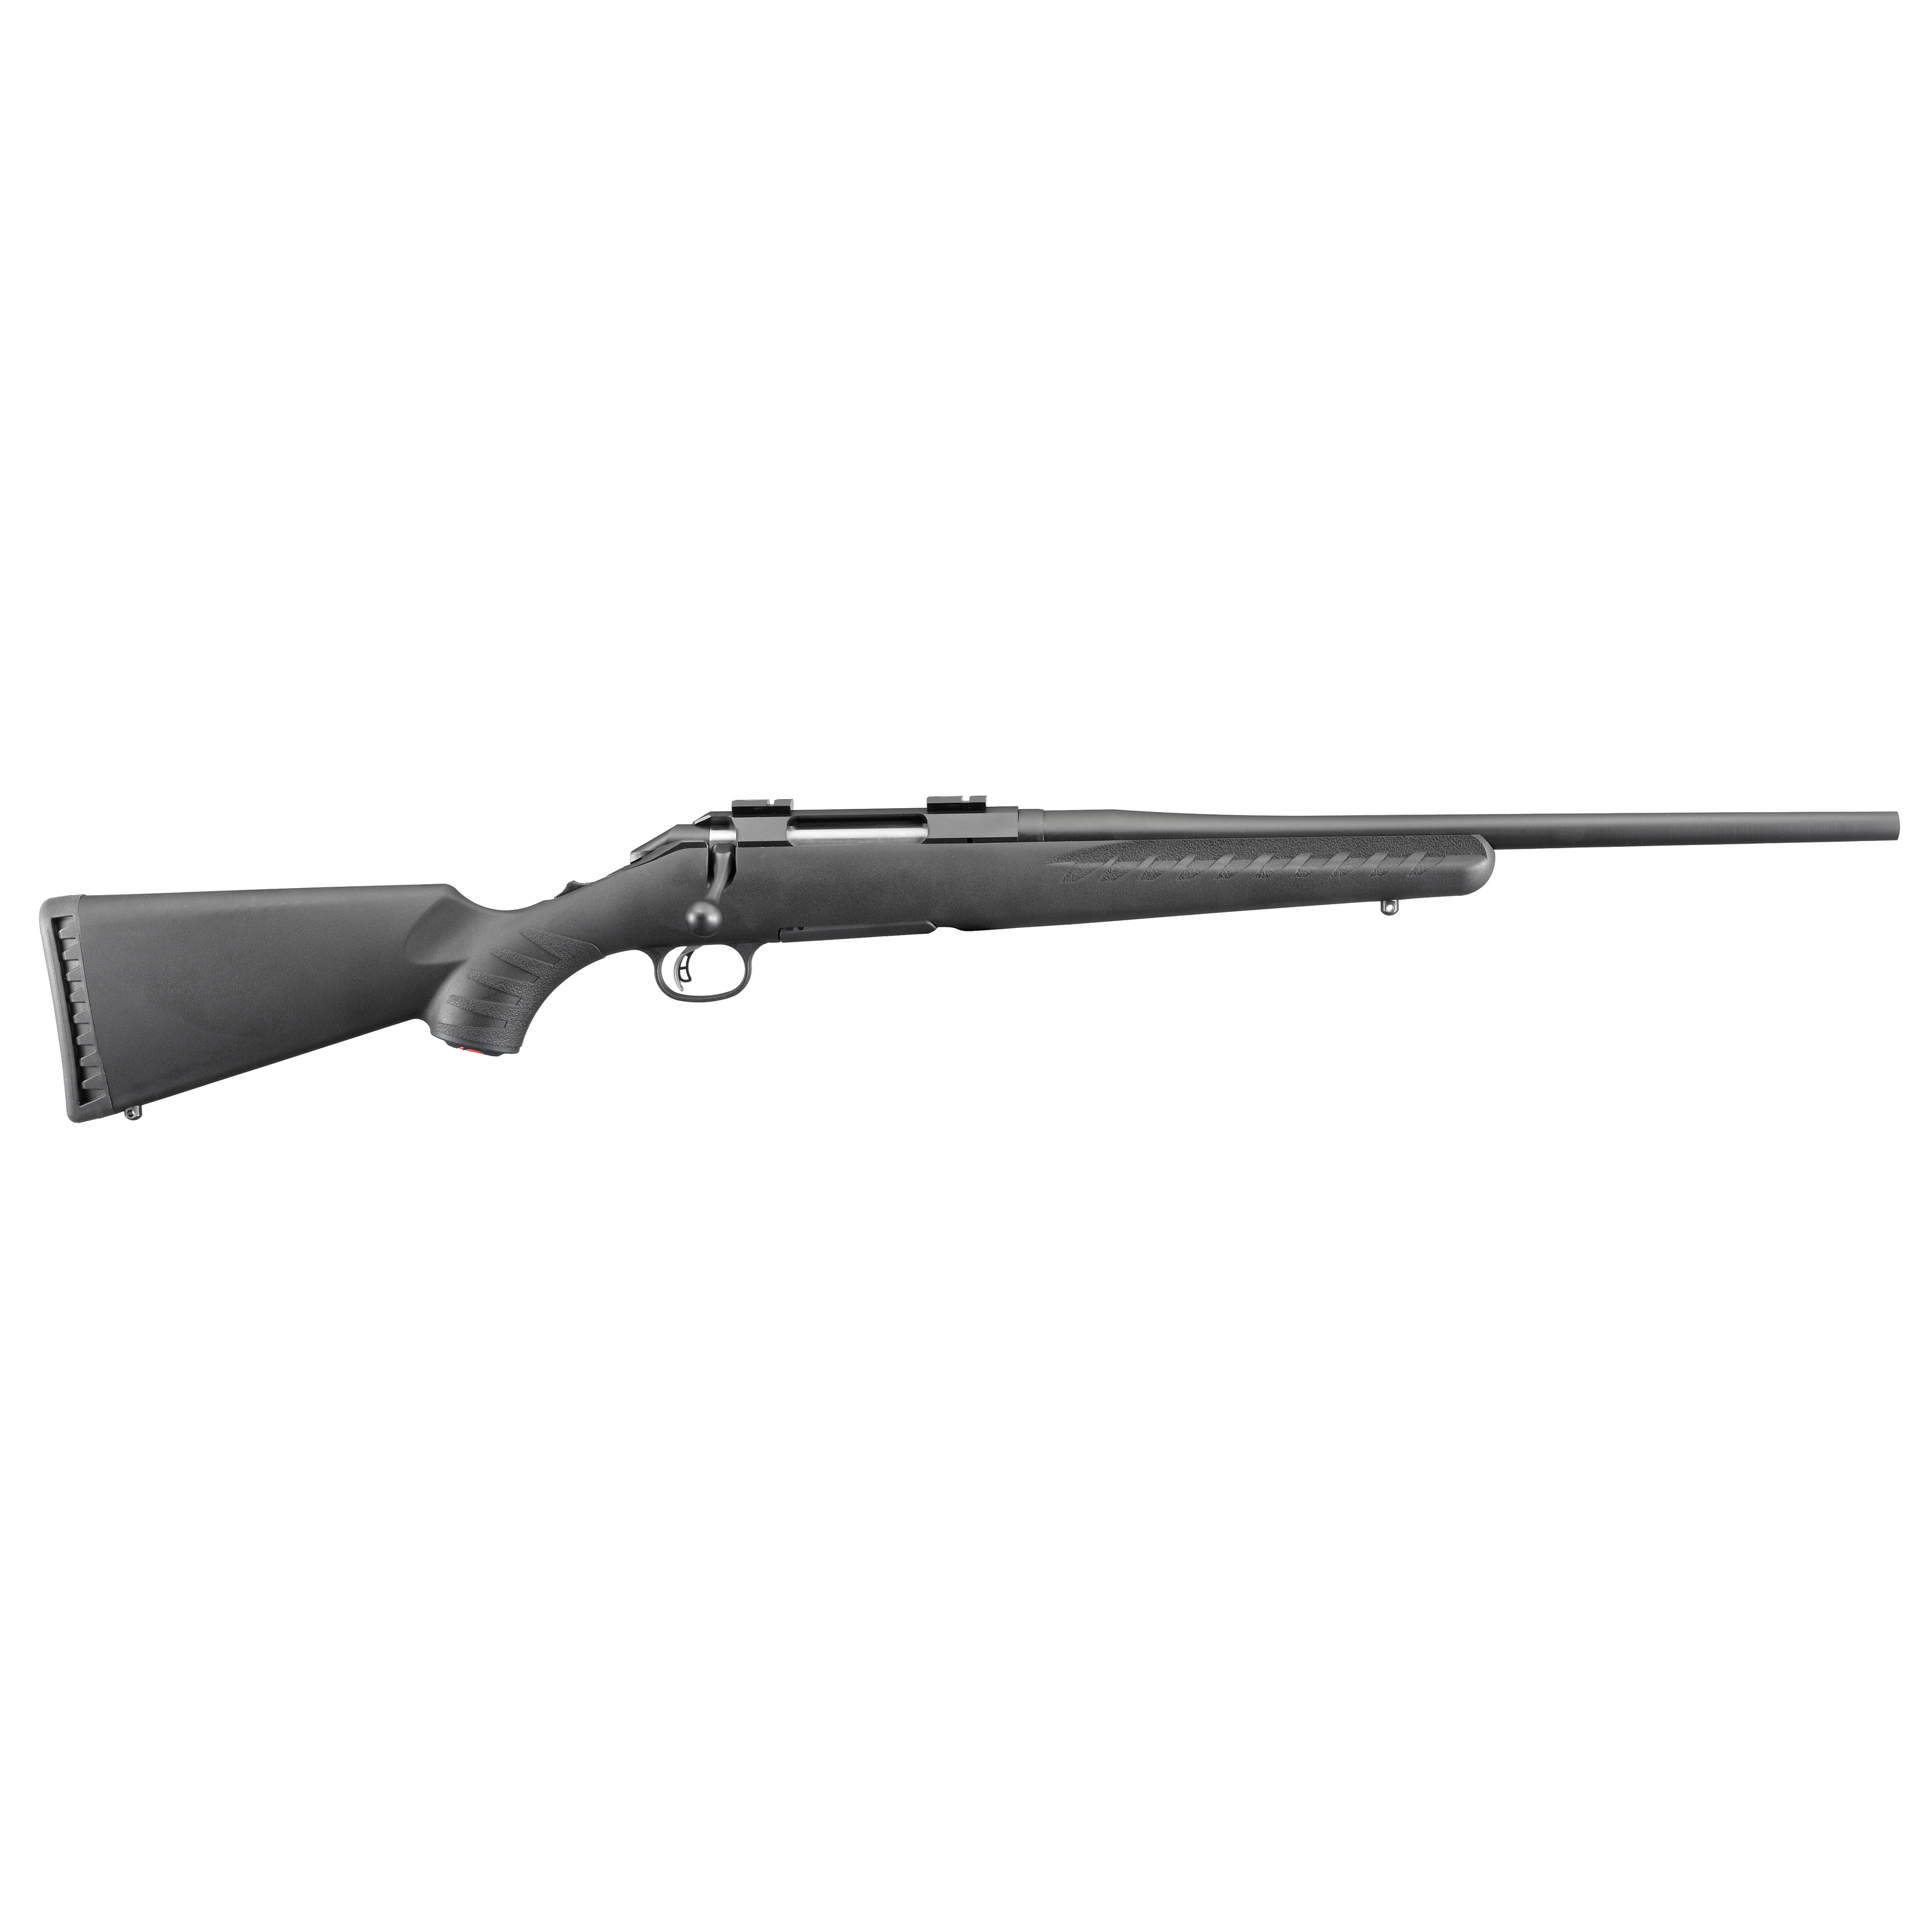 Ruger, American Rifle Compact, Bolt-Action Rifle, 308 Win, 18" Barrel, Matte Black Finish, Alloy Steel, Black Composite Stock, 4Rd